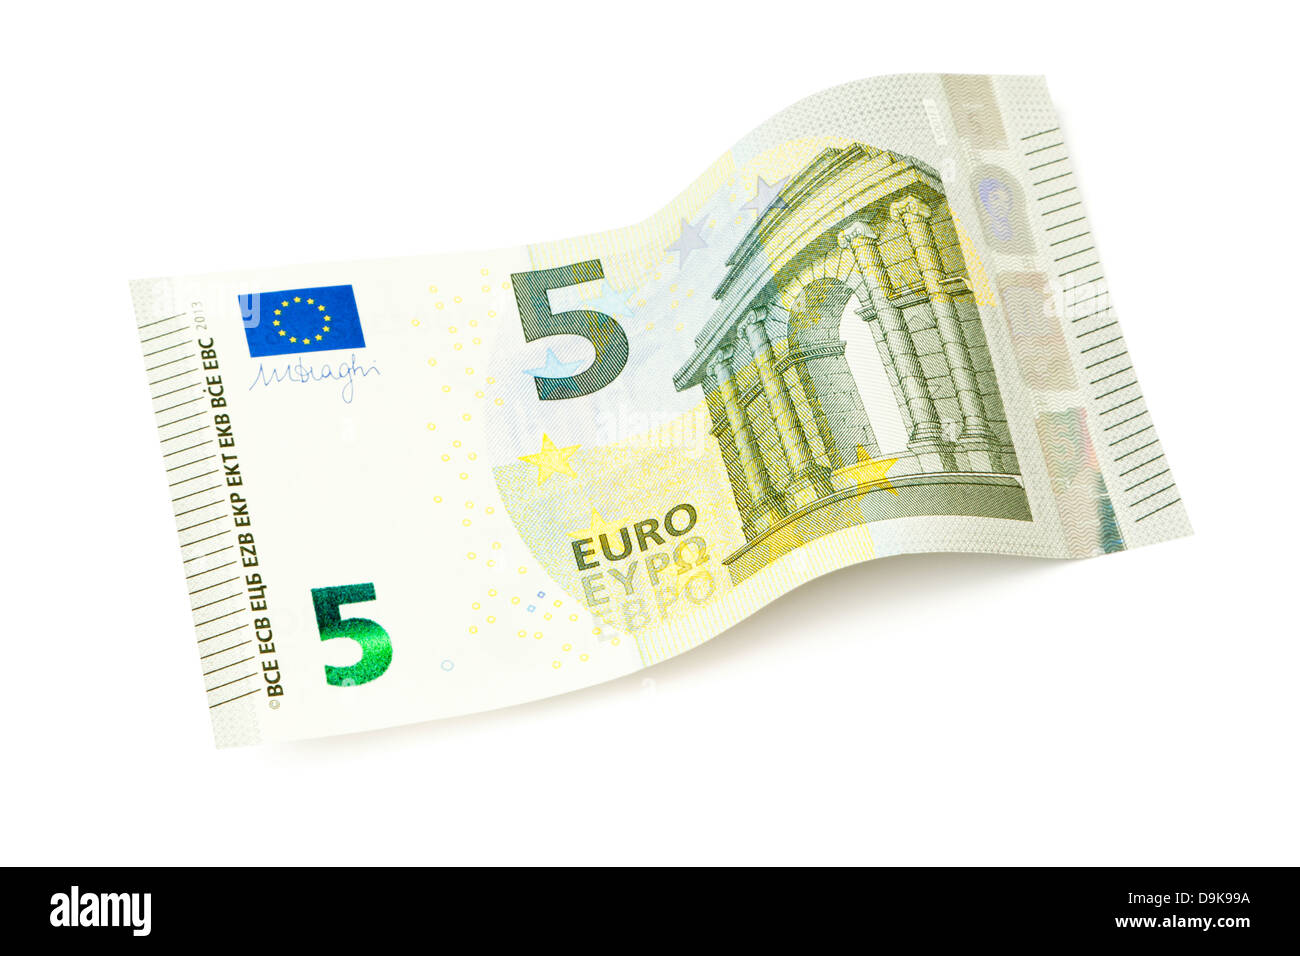 https://c8.alamy.com/comp/D9K99A/new-5-euro-bill-released-in-2013-isolated-on-white-background-D9K99A.jpg